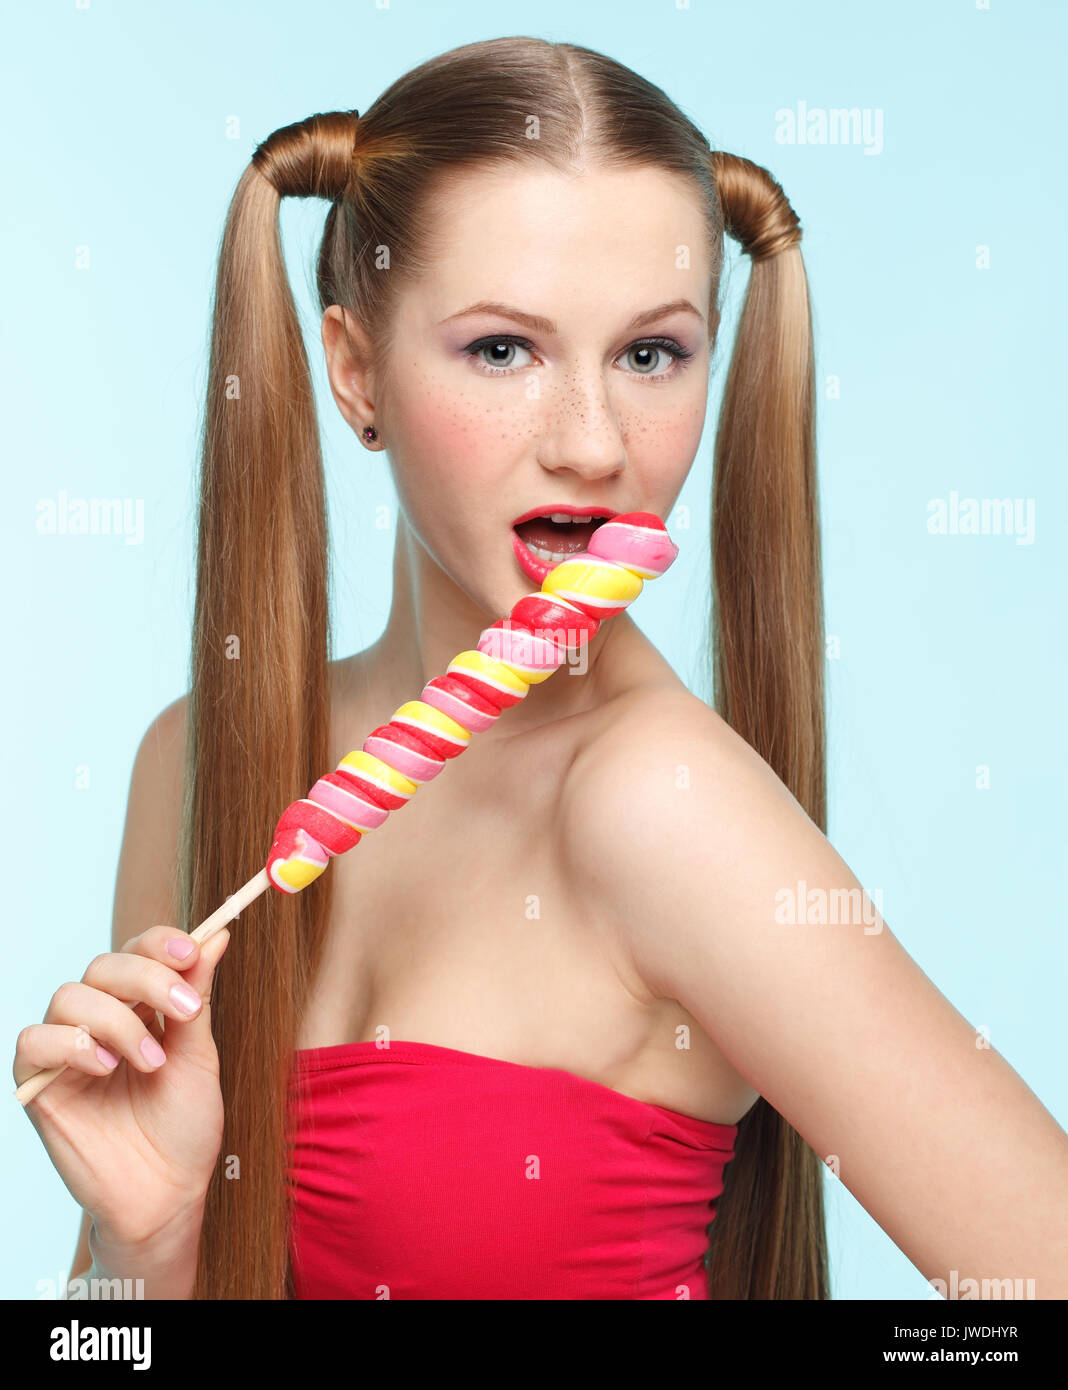 Beautiful playful young freckled girl licking lollipop on blue background Stock Photo